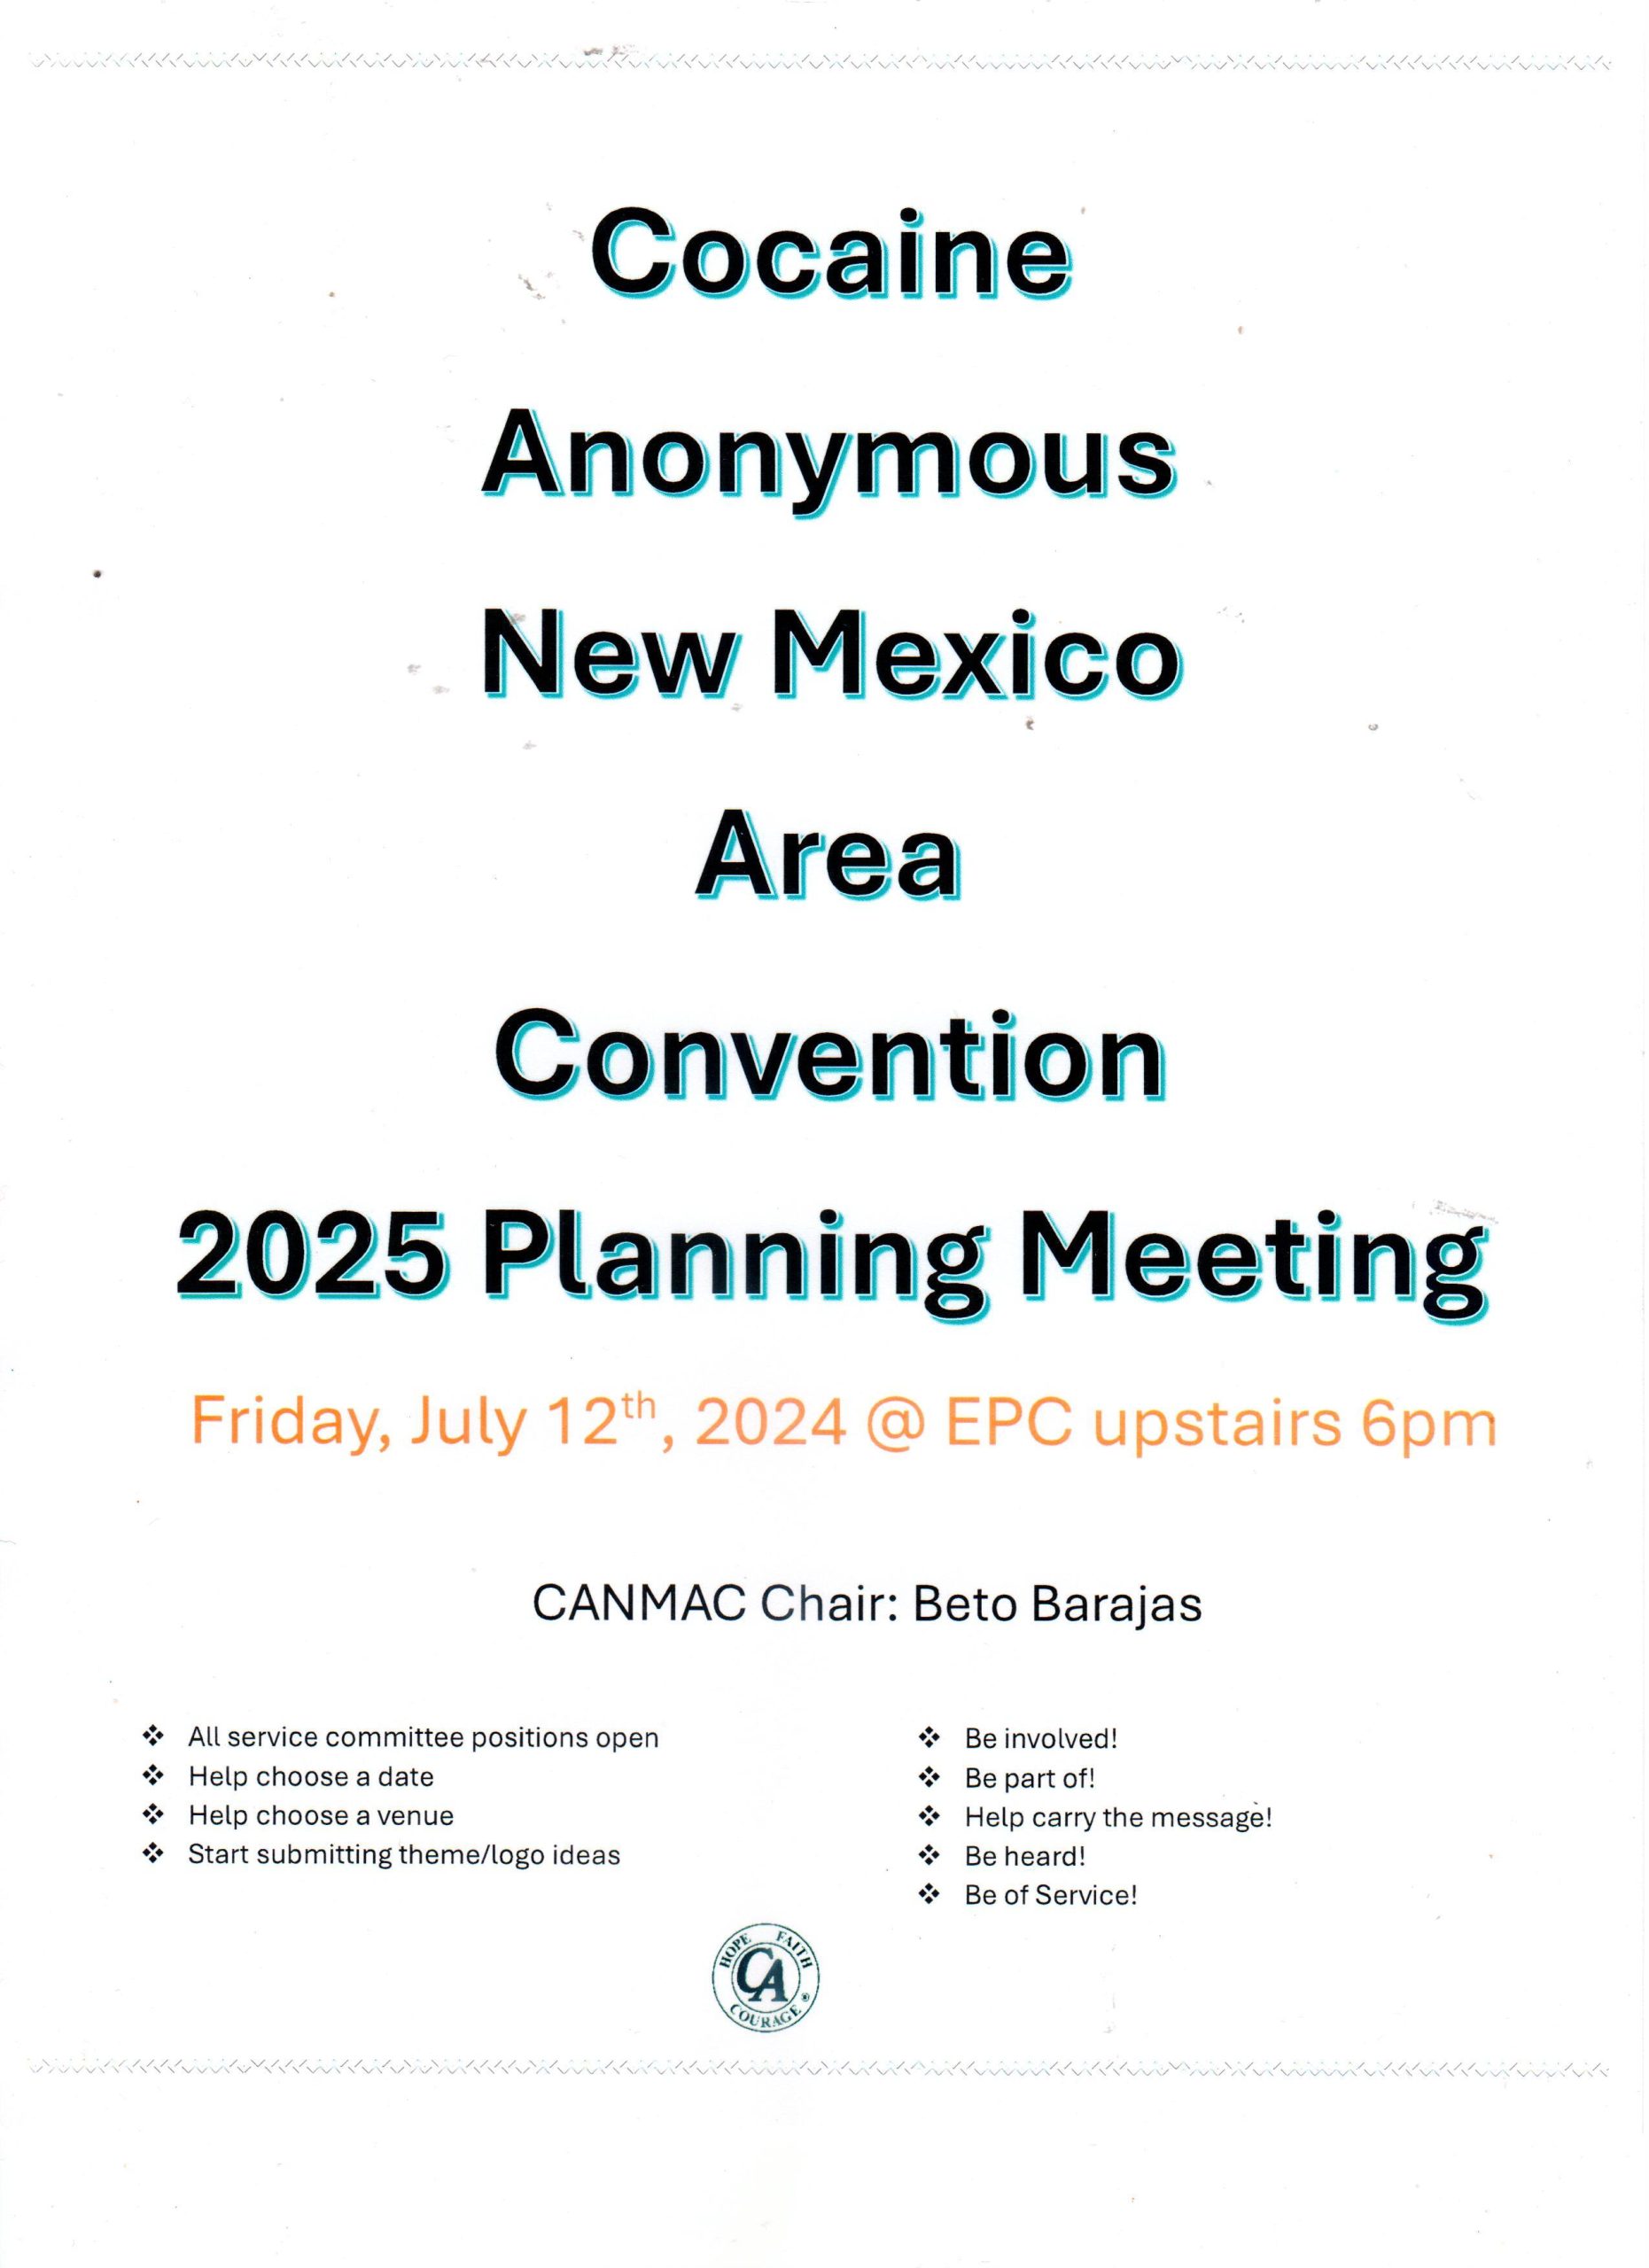 CANMAC Planning Meeting